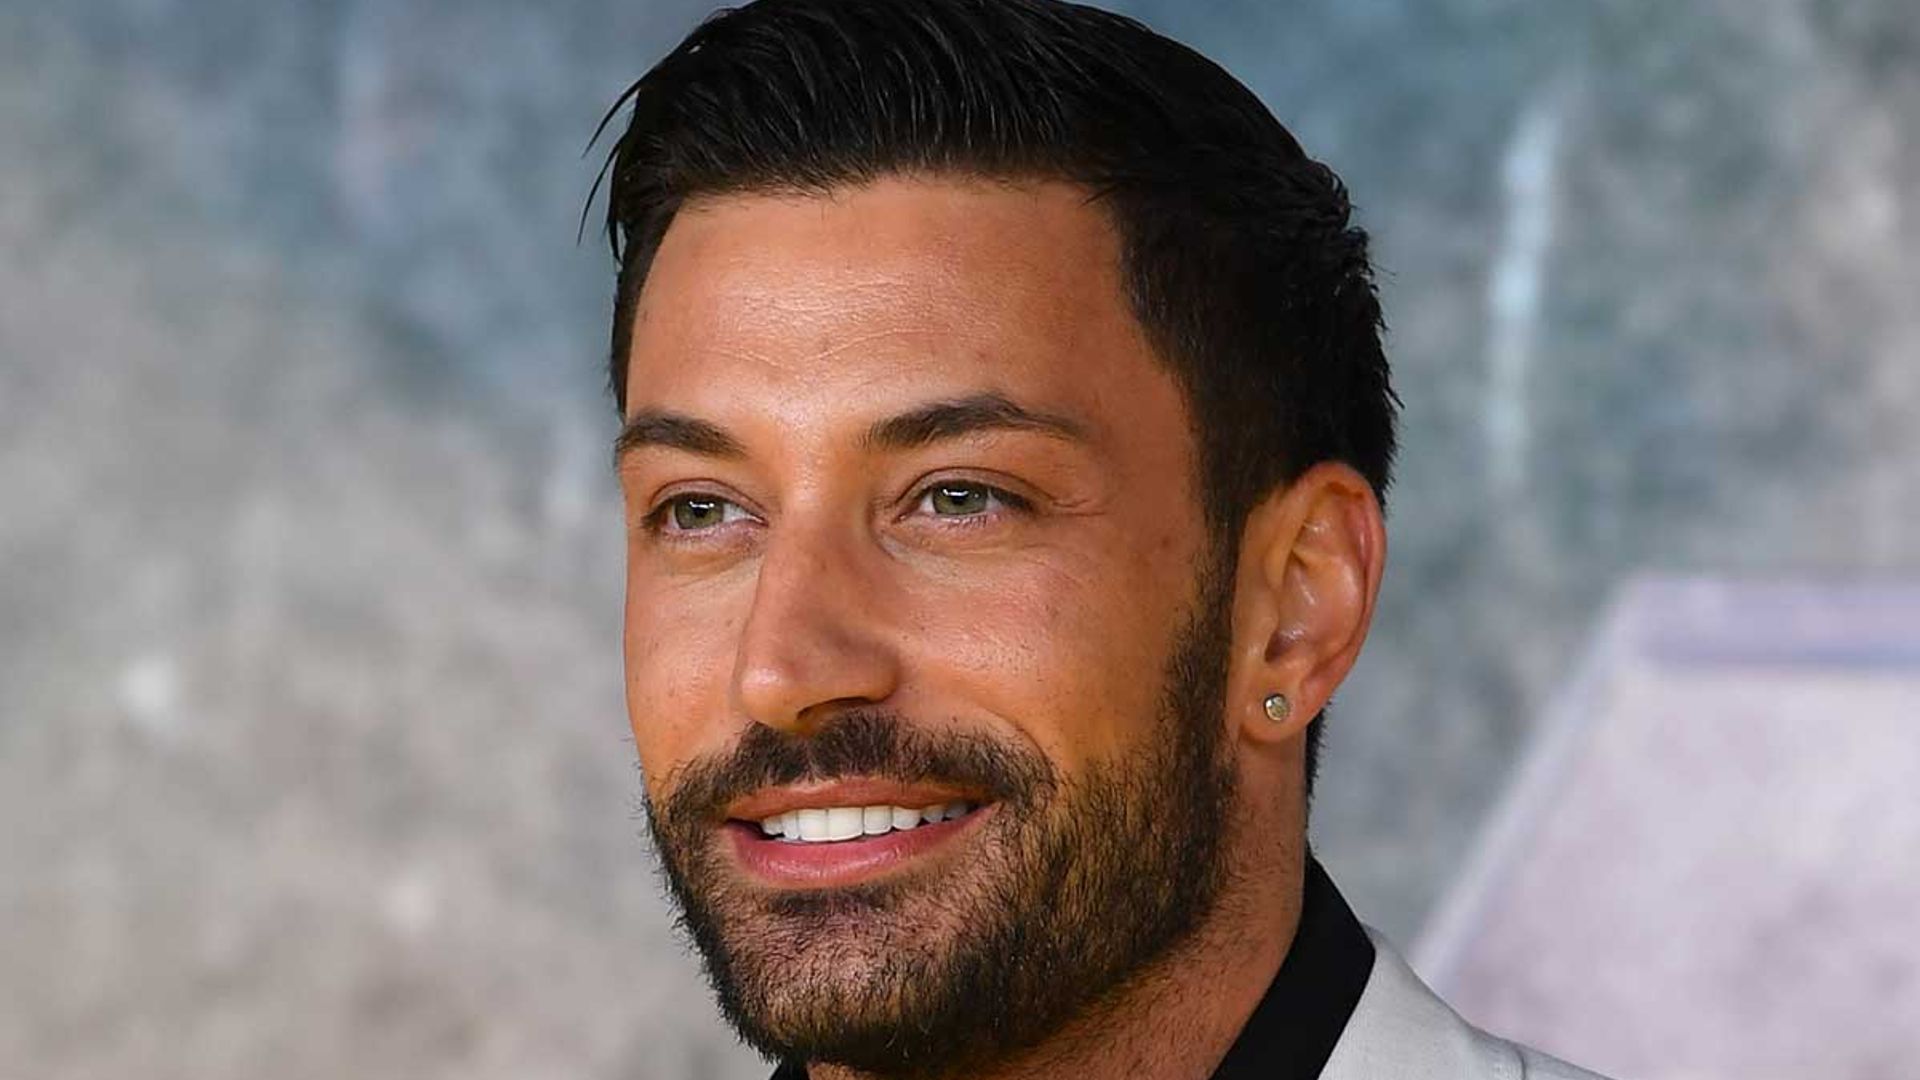 Strictly's Giovanni Pernice claps back at romance rumours  'your imagination cracks me up'